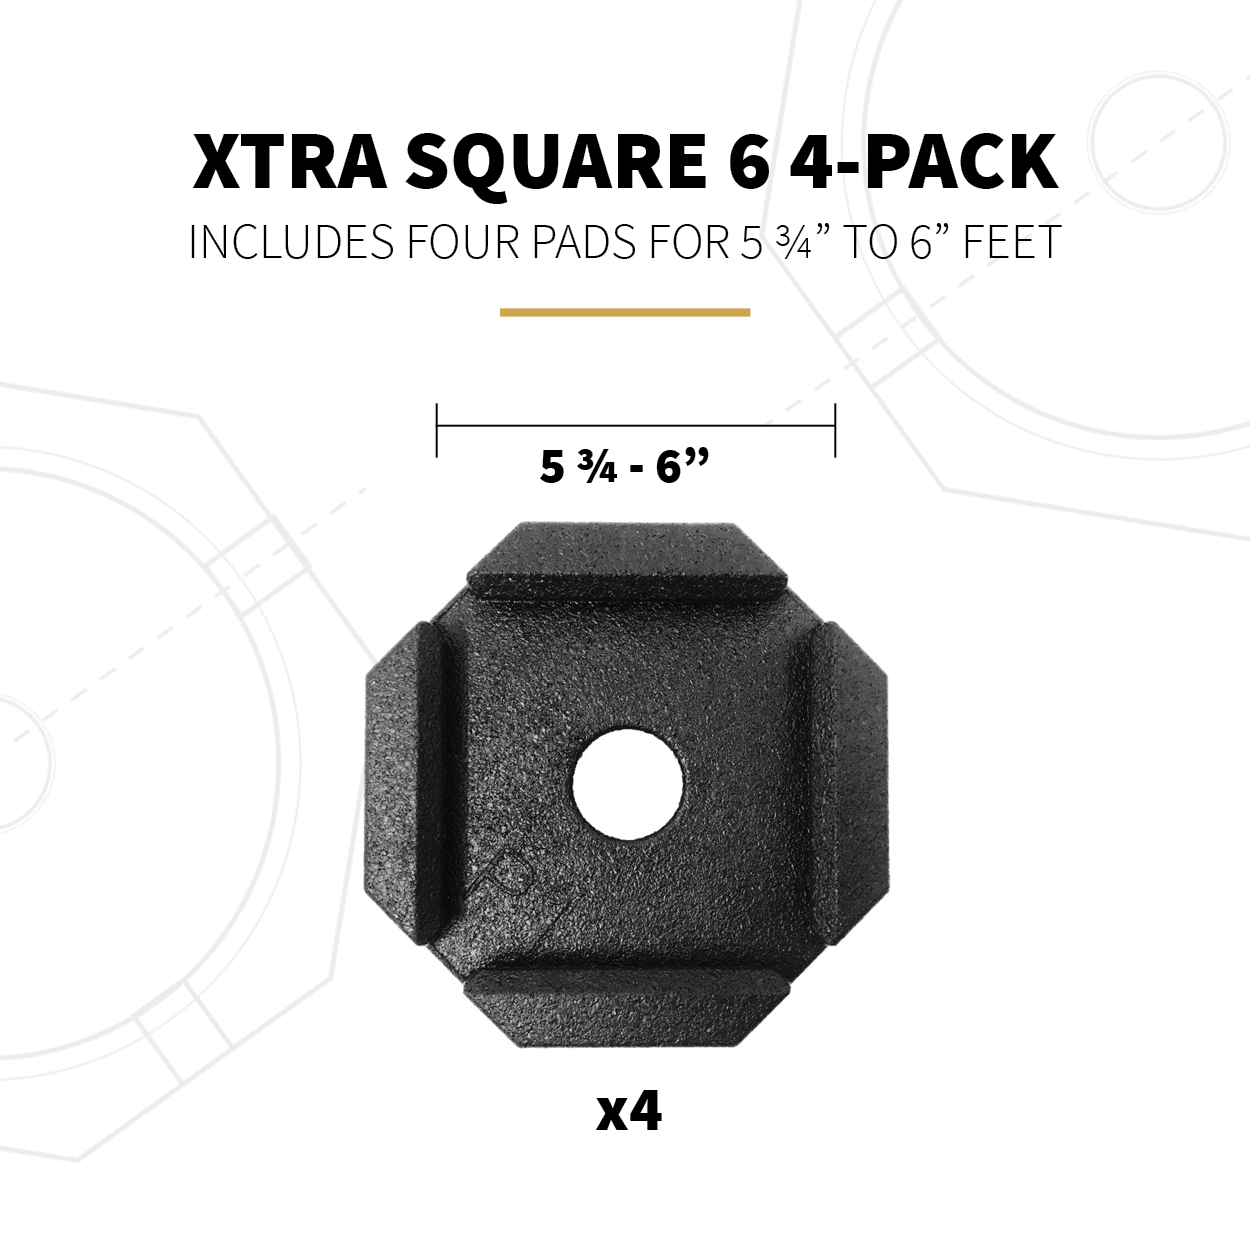 XTRA Square 6 4-Pack Specs